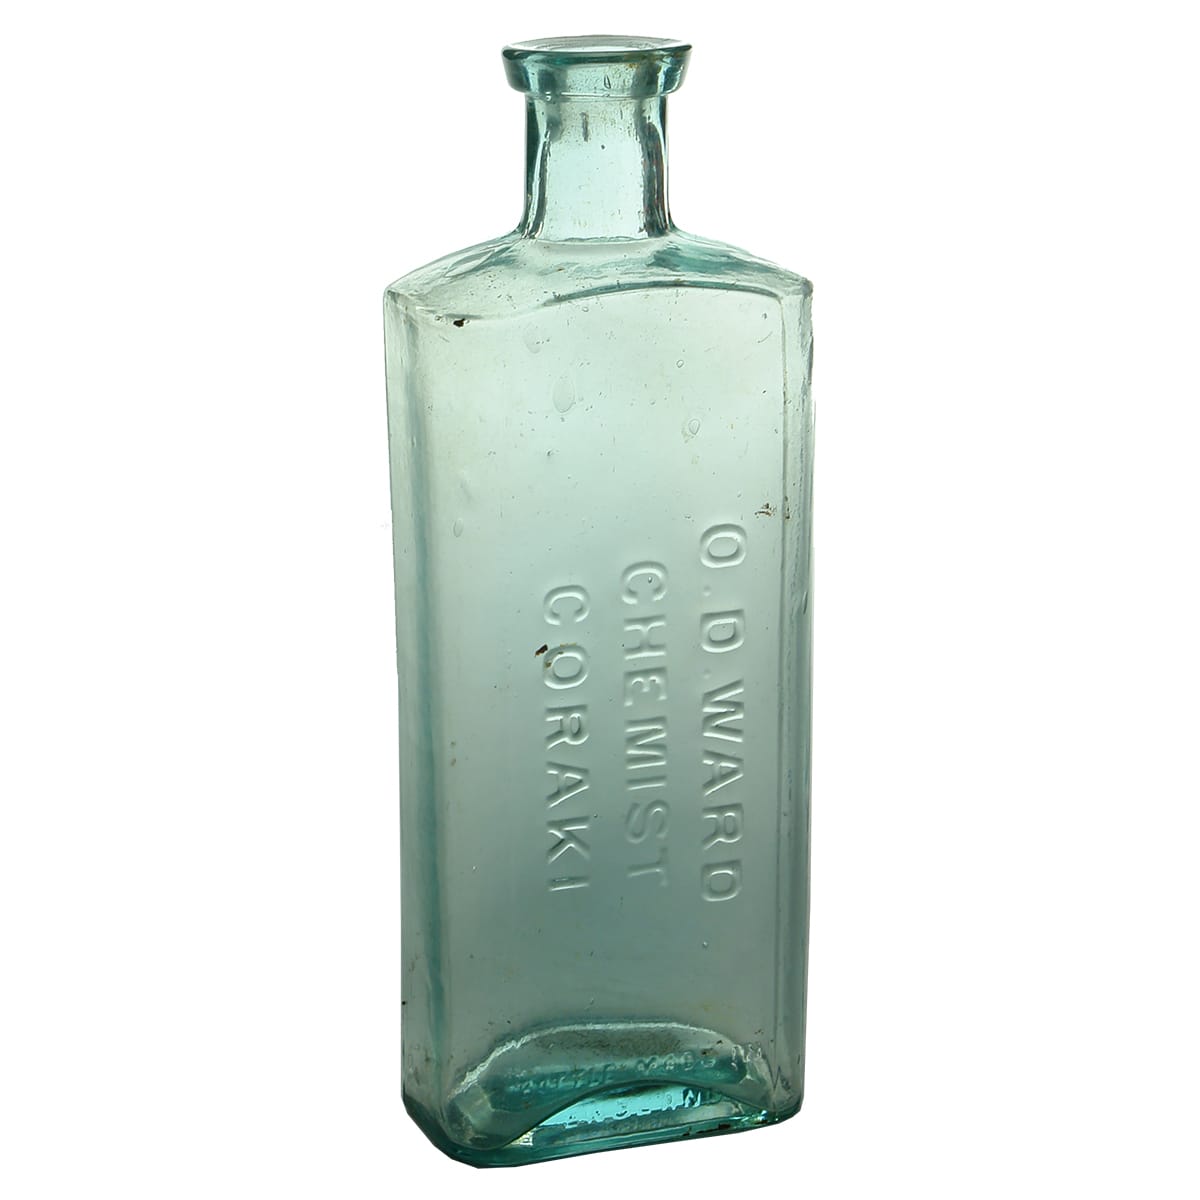 Chemist. O. D. Ward, Coraki. Bottle Made in England on front. Aqua. 8 oz. 165 mm (New South Wales)